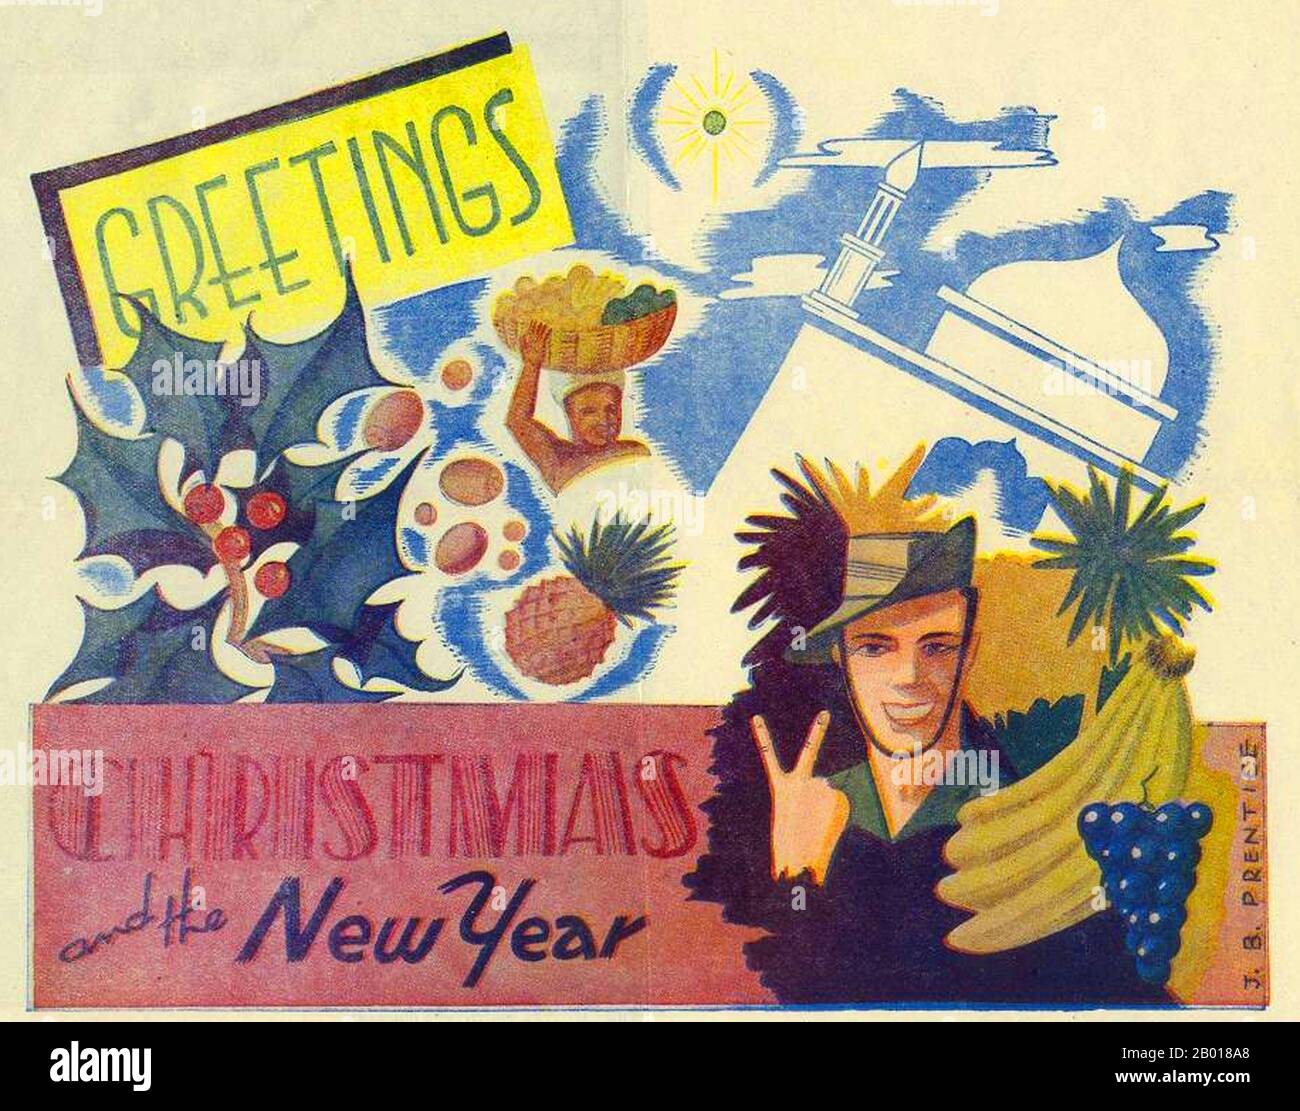 India: British Indian forces Christmas card - V for Victory in a tropical setting, c. 1941-1945.  China Burma India Theatre (CBI) was the name used by the United States Army for its forces operating in conjunction with British and Chinese Allied air and land forces in China, Burma, and India during World War II. Well-known US units in this theatre included the Flying Tigers, transport and bomber units flying the Hump, the 1st Air Commando Group, the engineers who built Ledo Road, and the 5307th Composite Unit (Provisional), otherwise known as Merrill's Marauders. Stock Photo